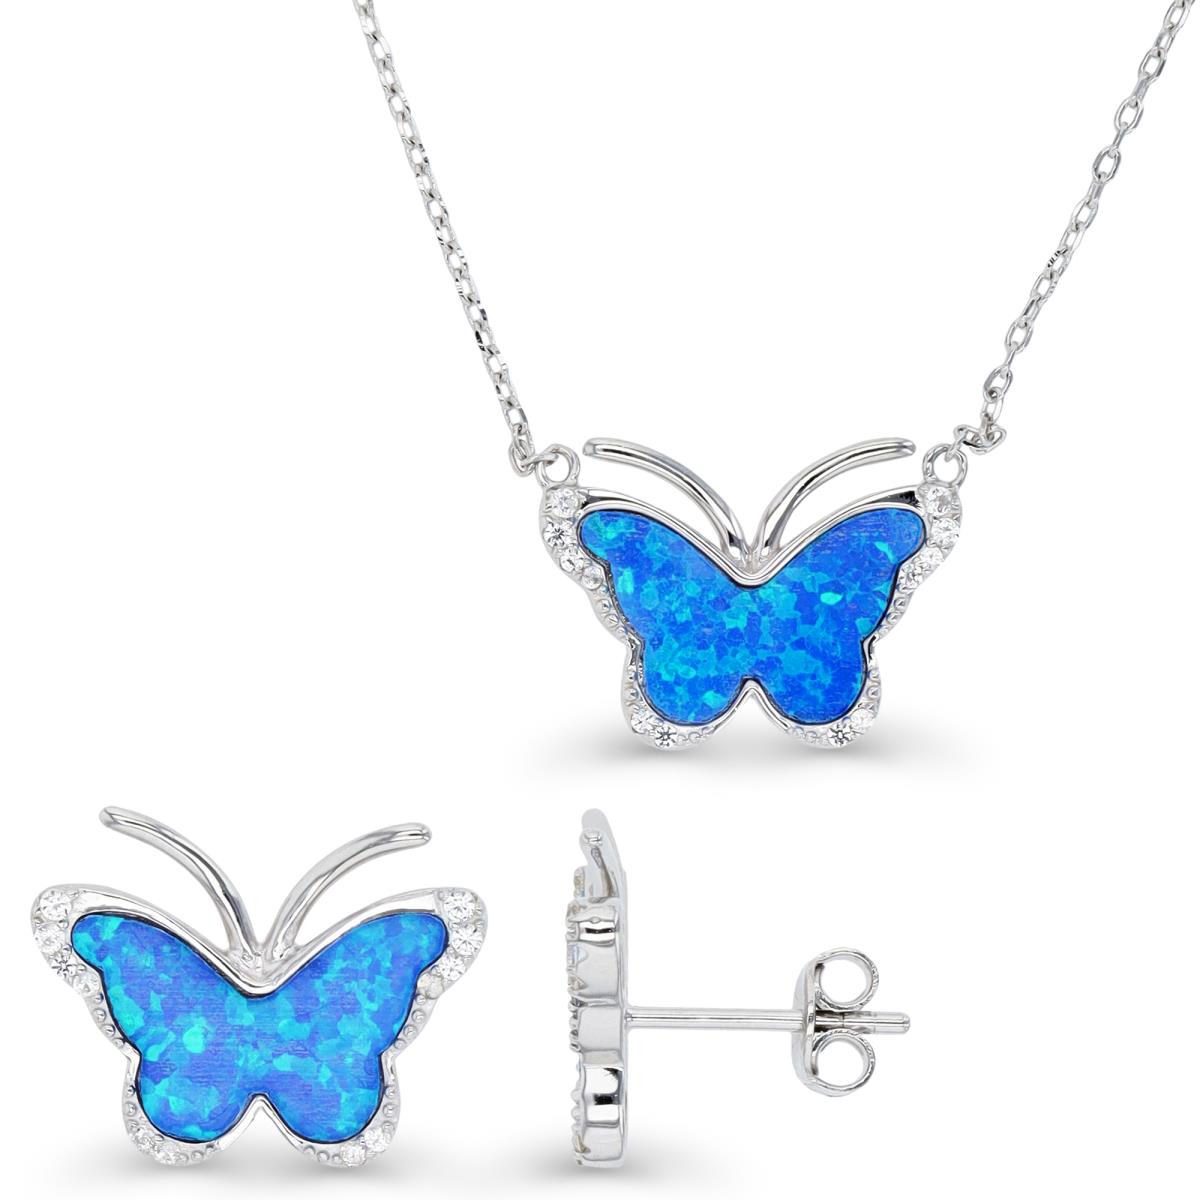 Sterling Silver Rhodium & Cr. Blue Opal and Cr. White Sapphire Earrings and Necklace Set